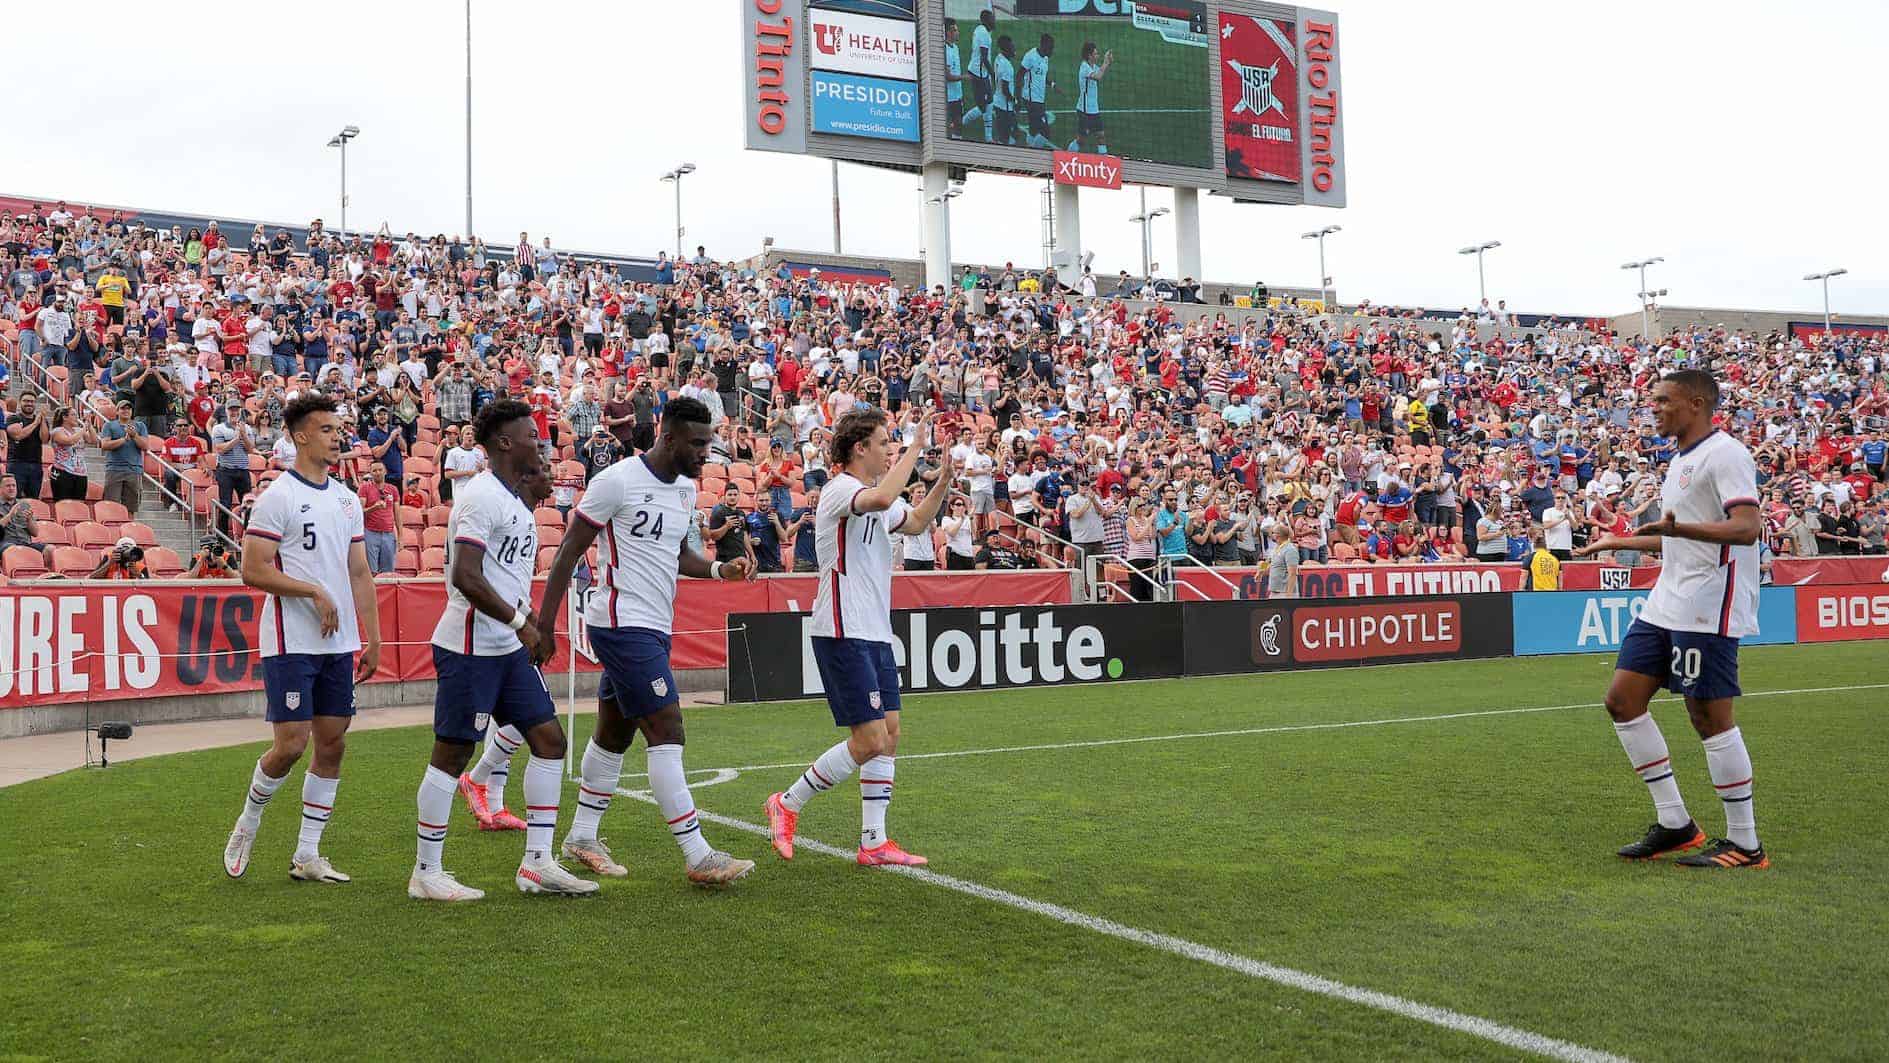 The USMNT celebrates a goal against Costa Rica on June 9, 2021.